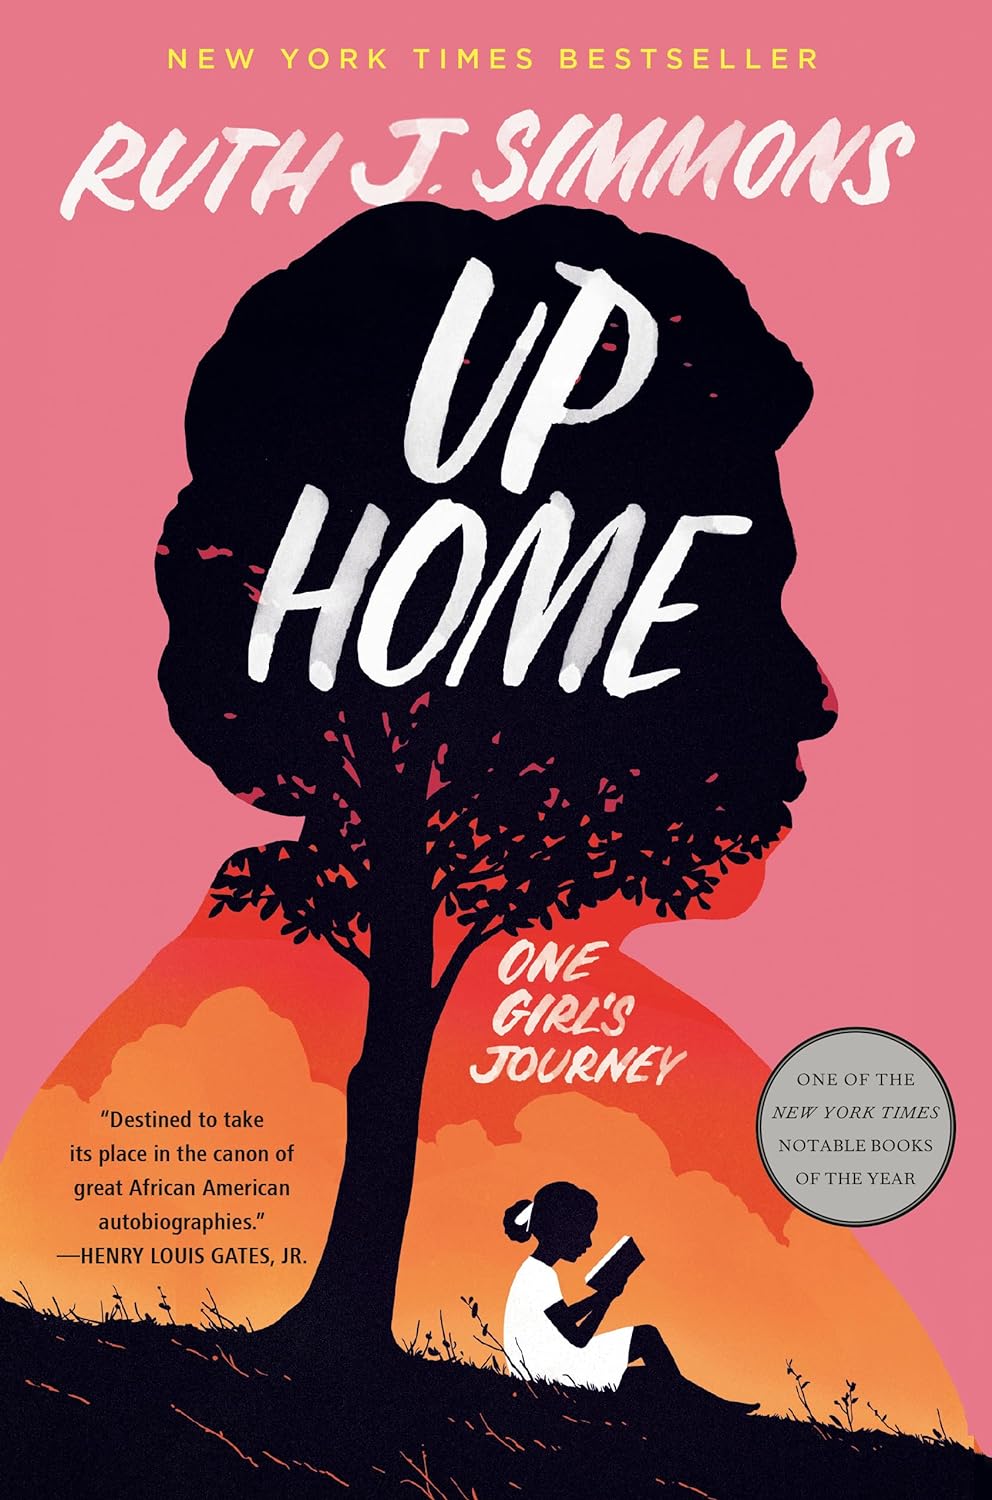 "Up Home"